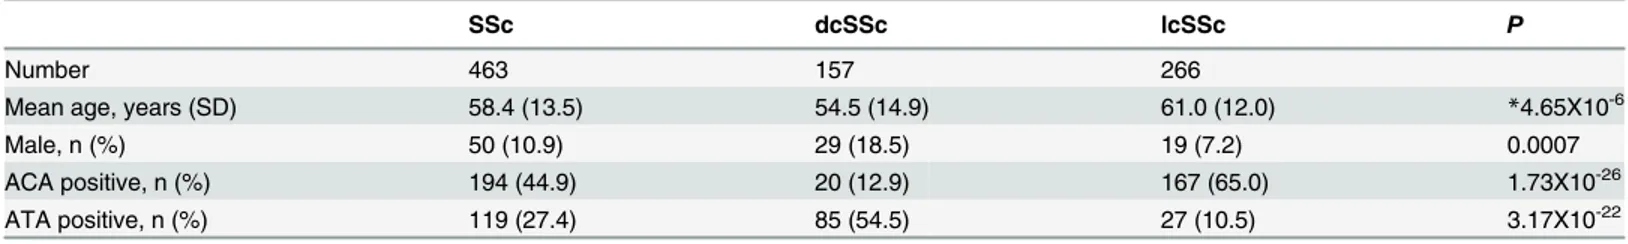 Table 1. Characteristics of the SSc patients.